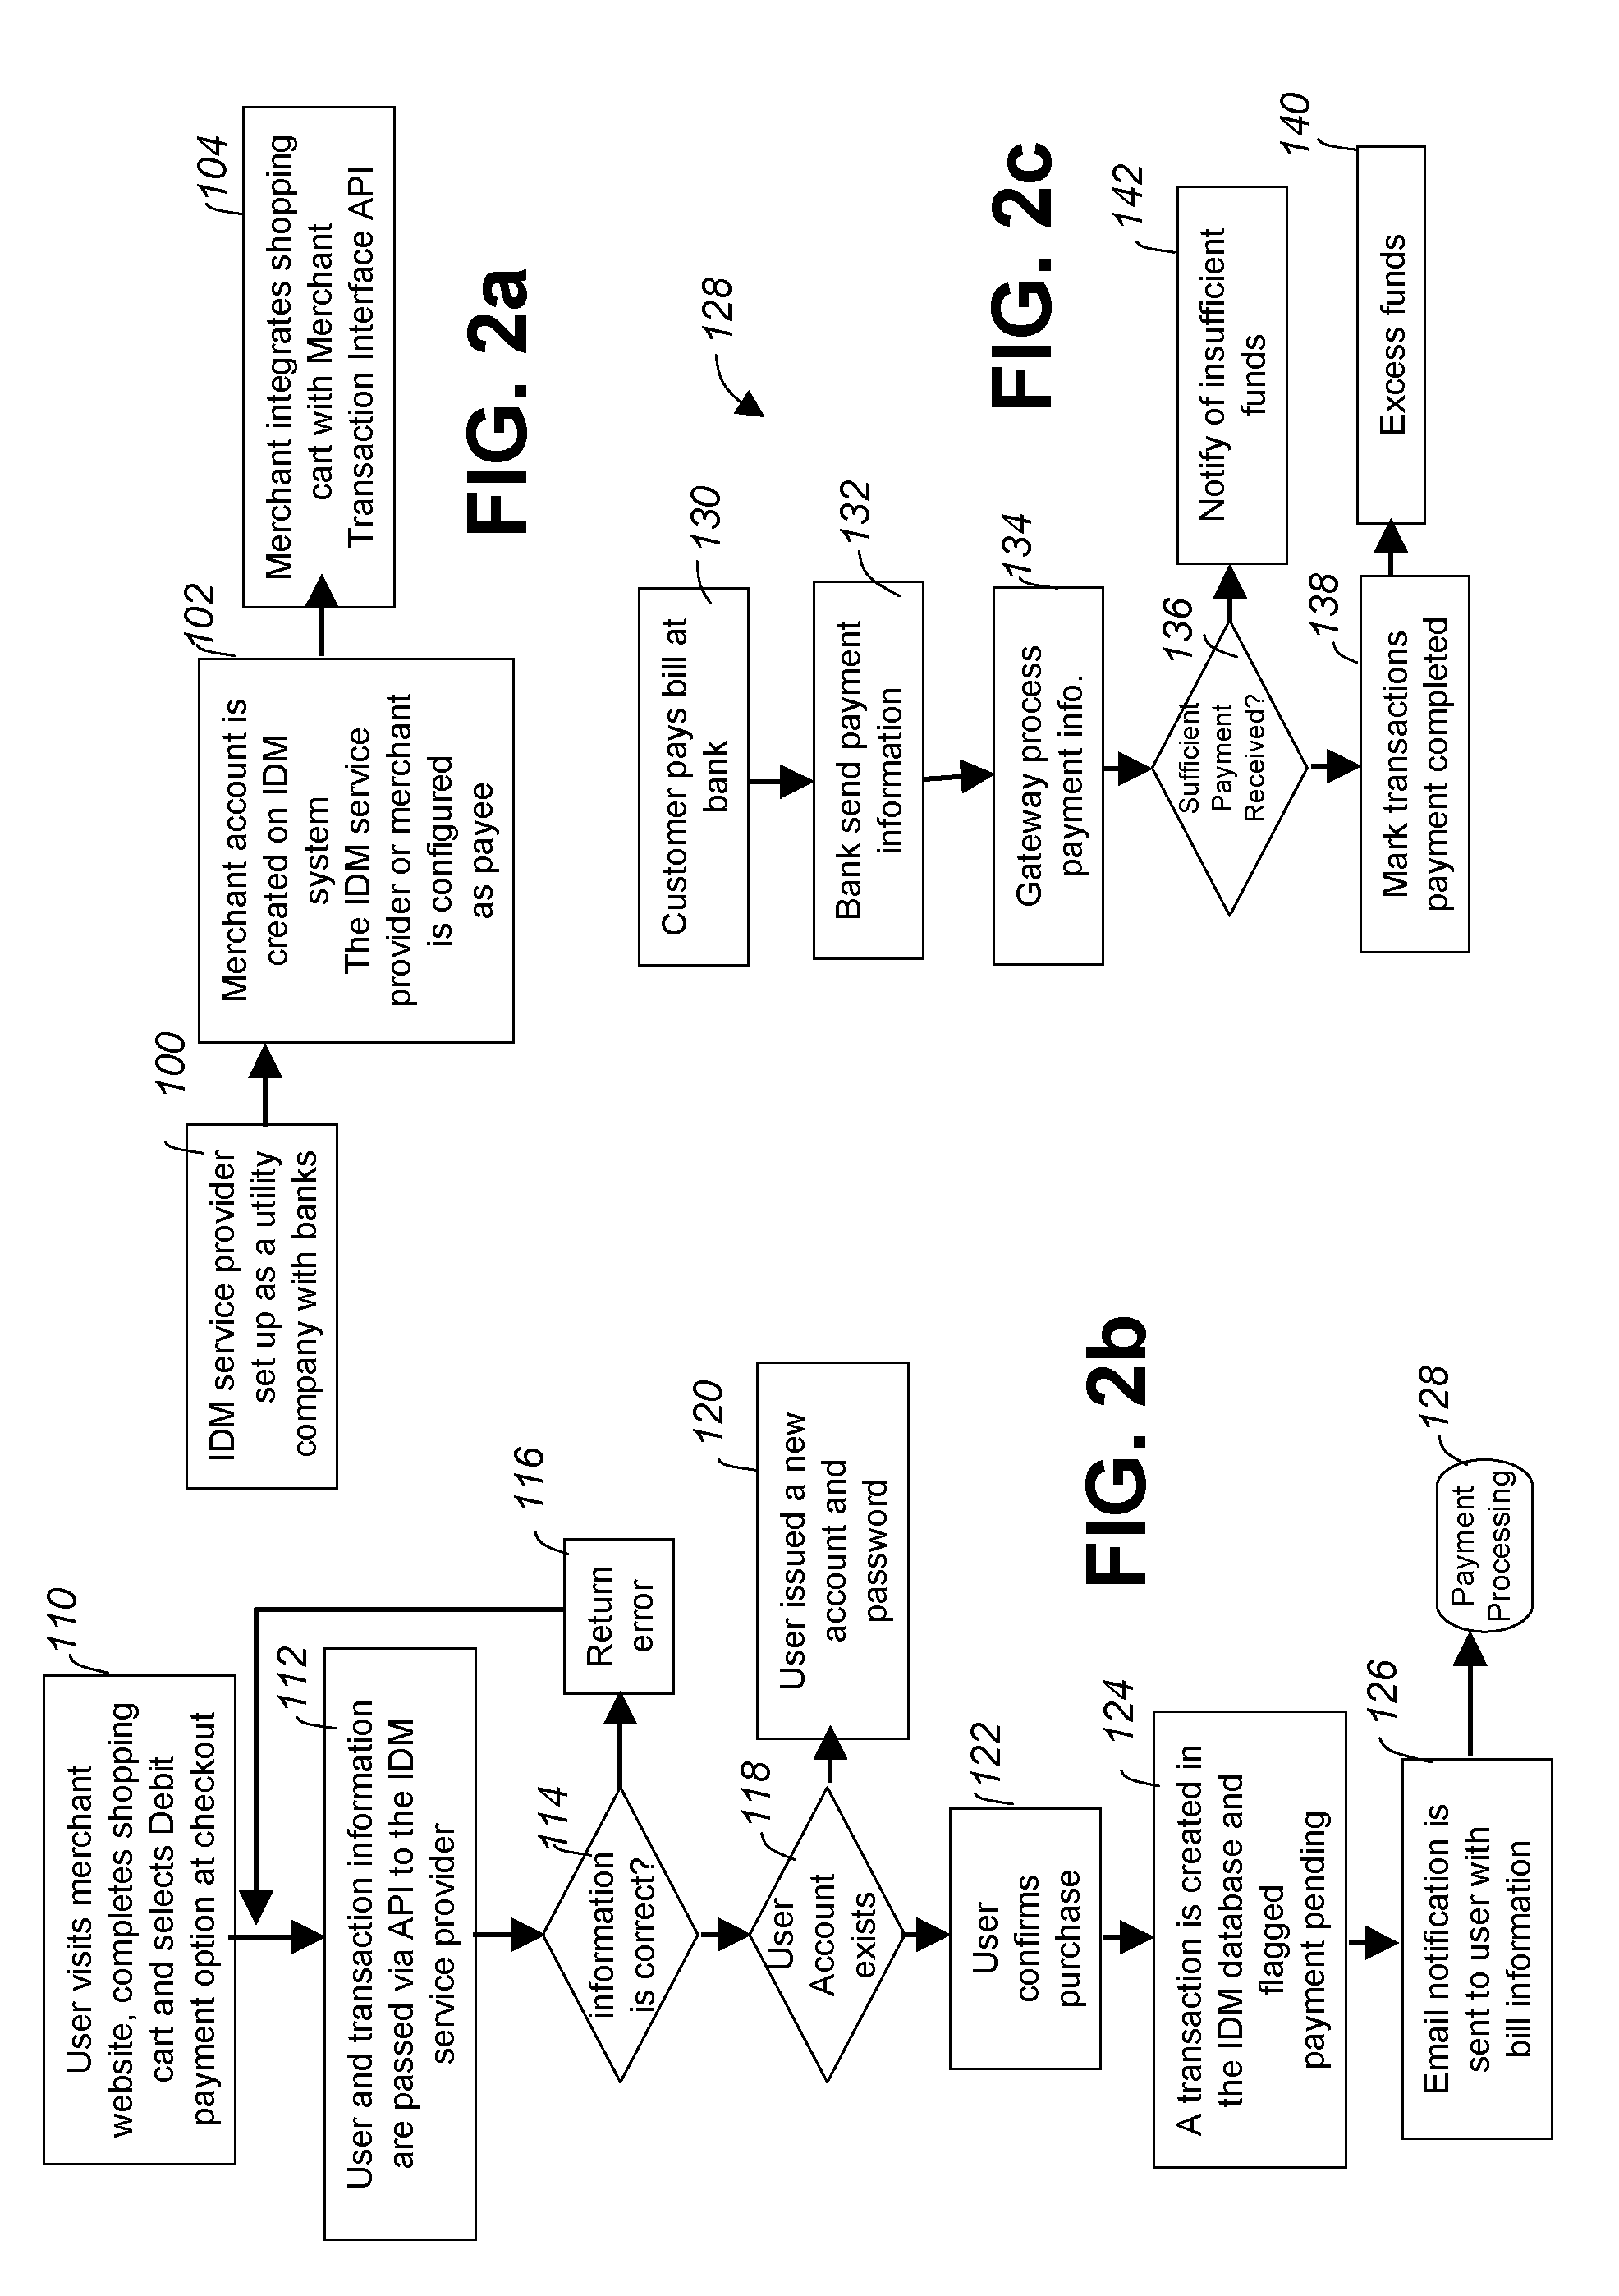 Internet payment system and method